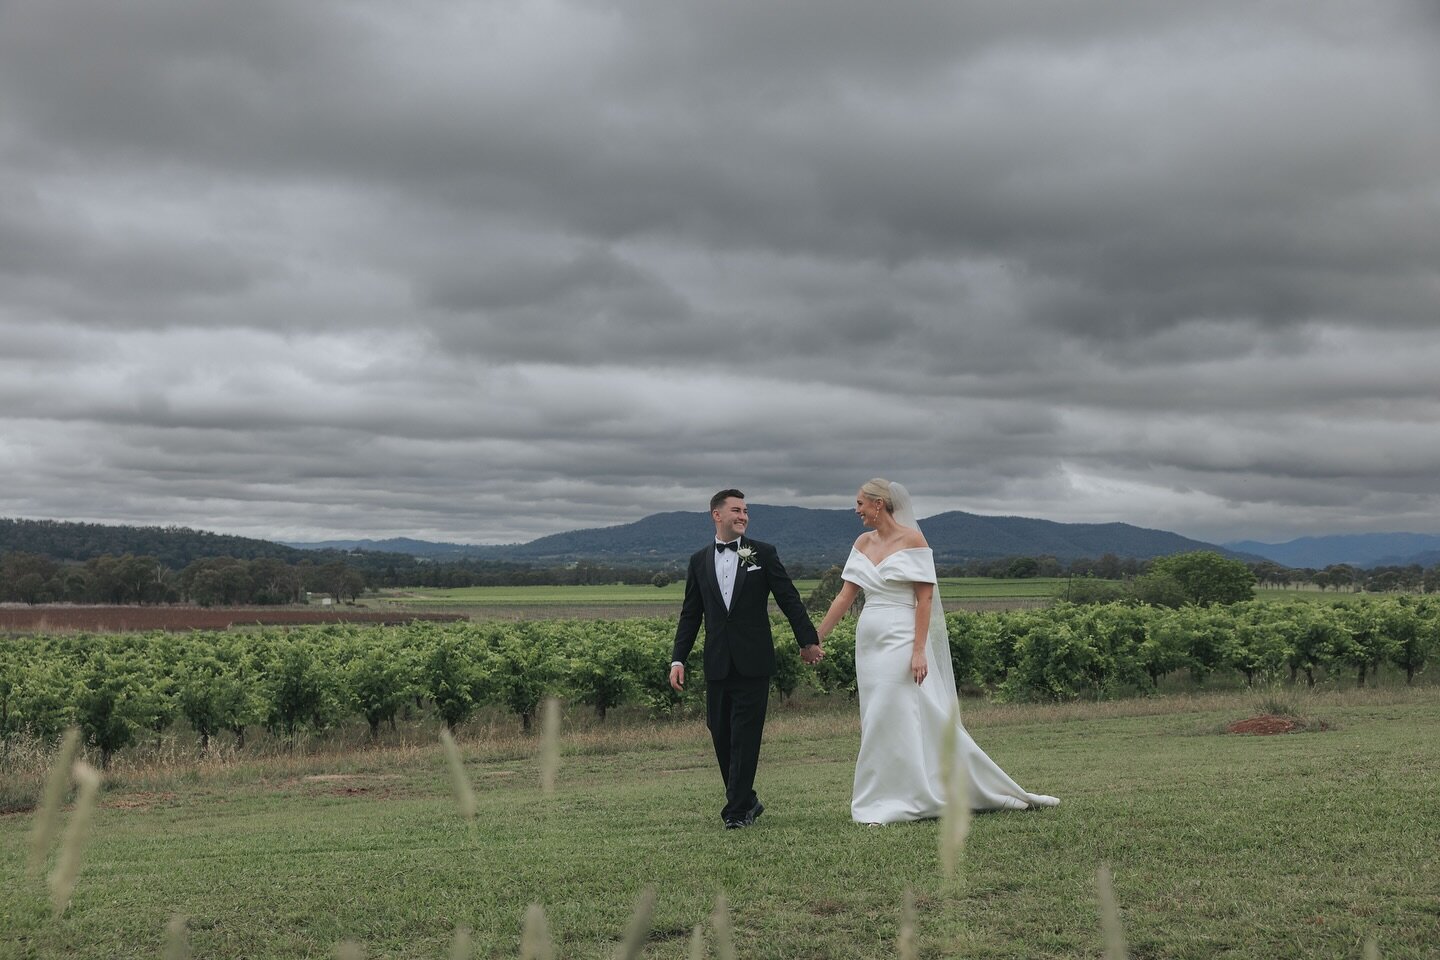 It was threatening to rain all week but Aedan and Claire lucked out with some of the best storm clouds we&rsquo;ve seen! @